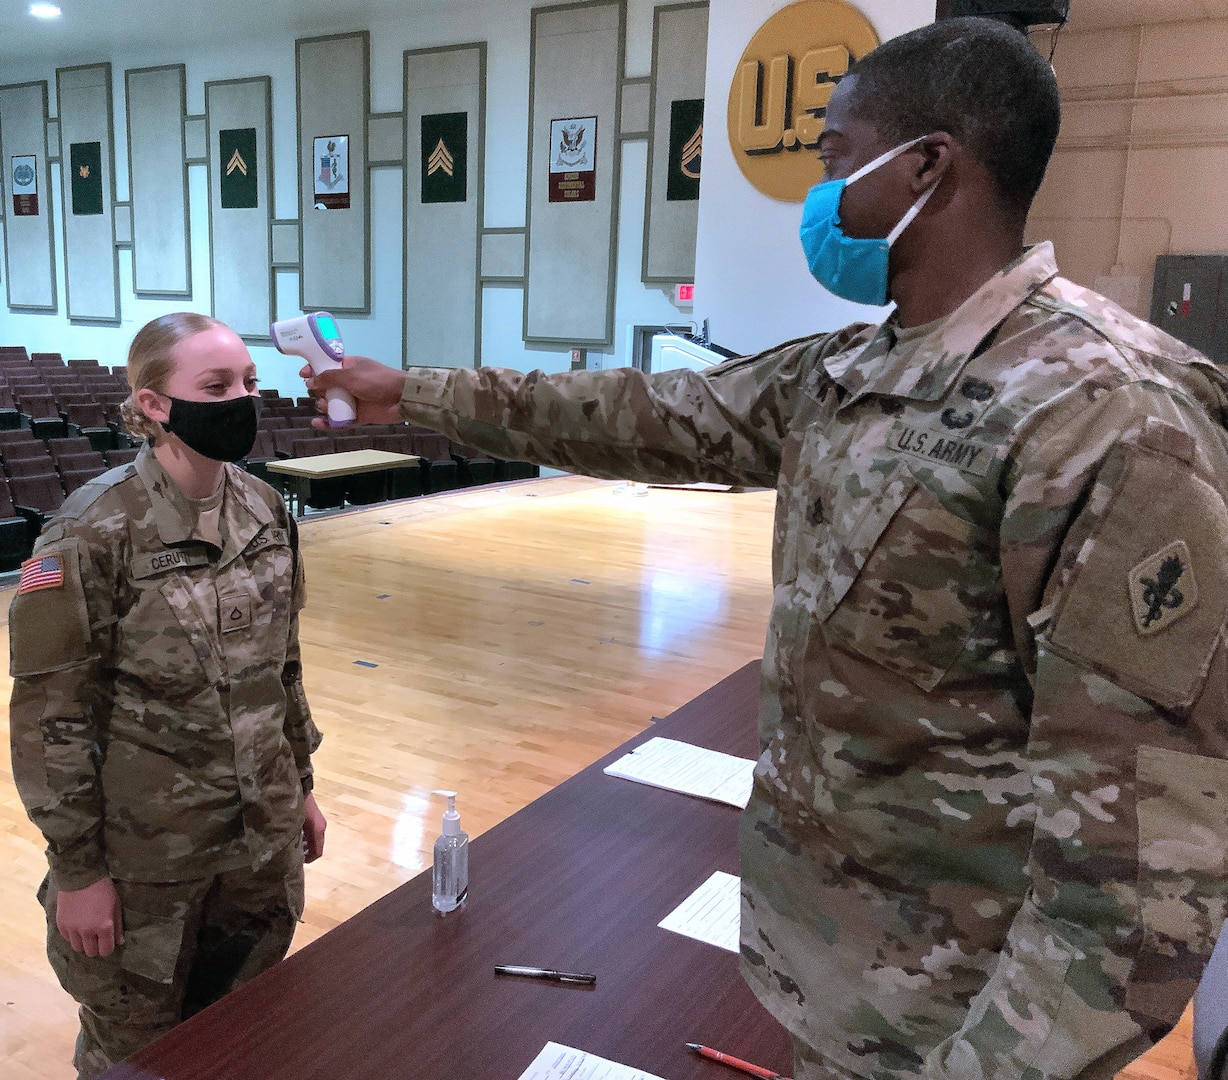 Staff Sgt. Michael White, an instructor with the 187th Medical Battalion, takes Pfc. Amaya Cerutti’s temperature after she returned from Holiday Block Leave.